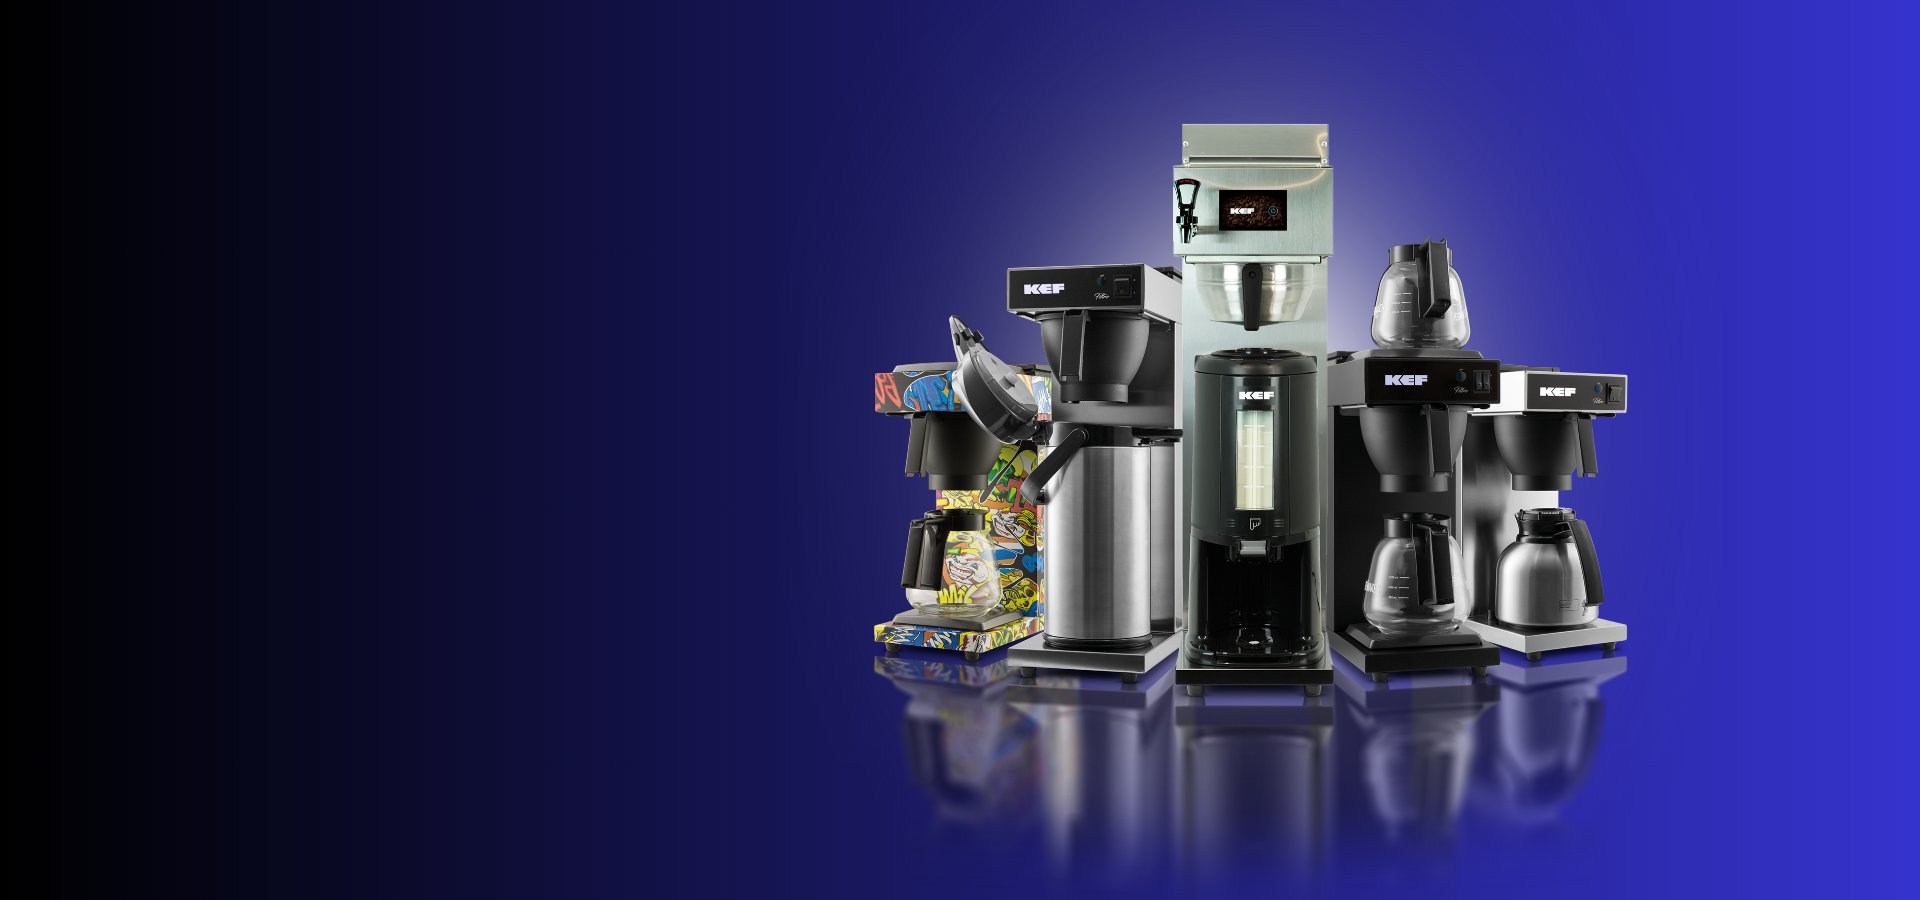 Filter Coffee Makers